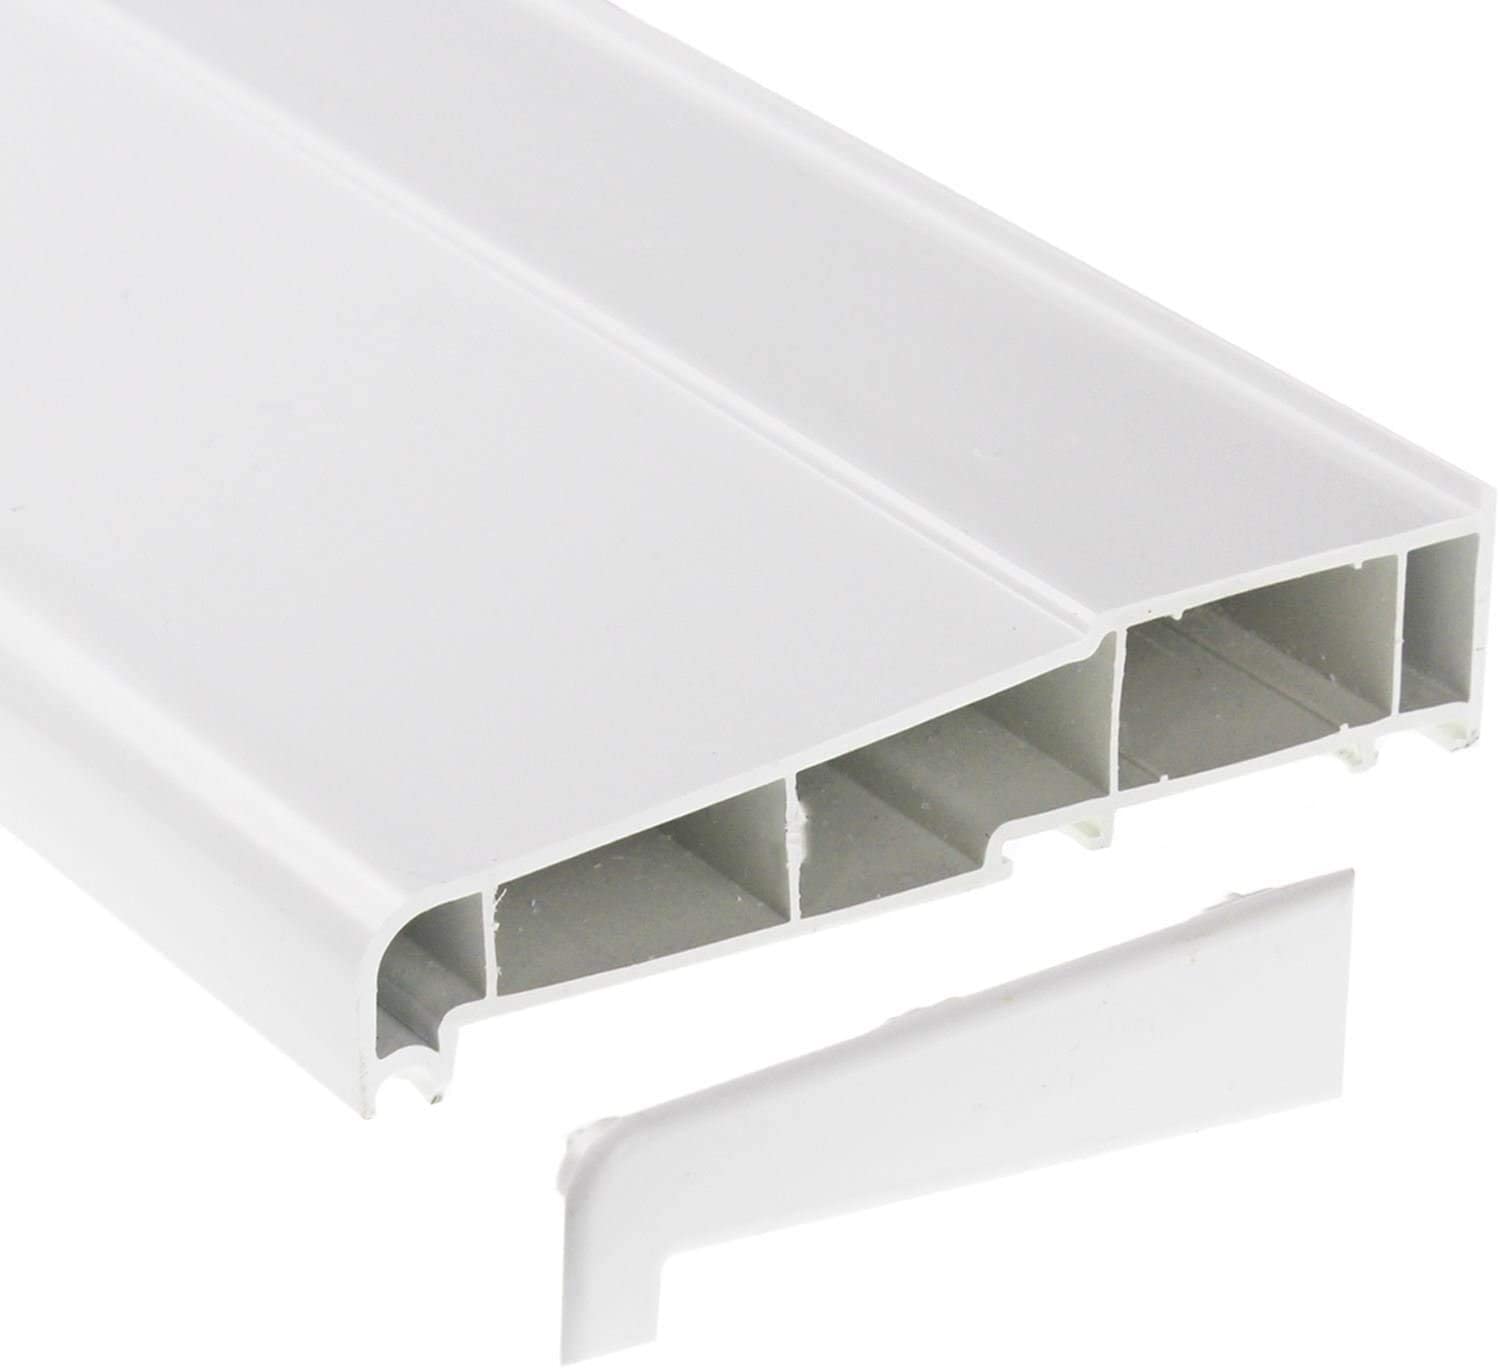 UPVC Window Cill (Sill) Including End Caps - Various Colours and Sizes